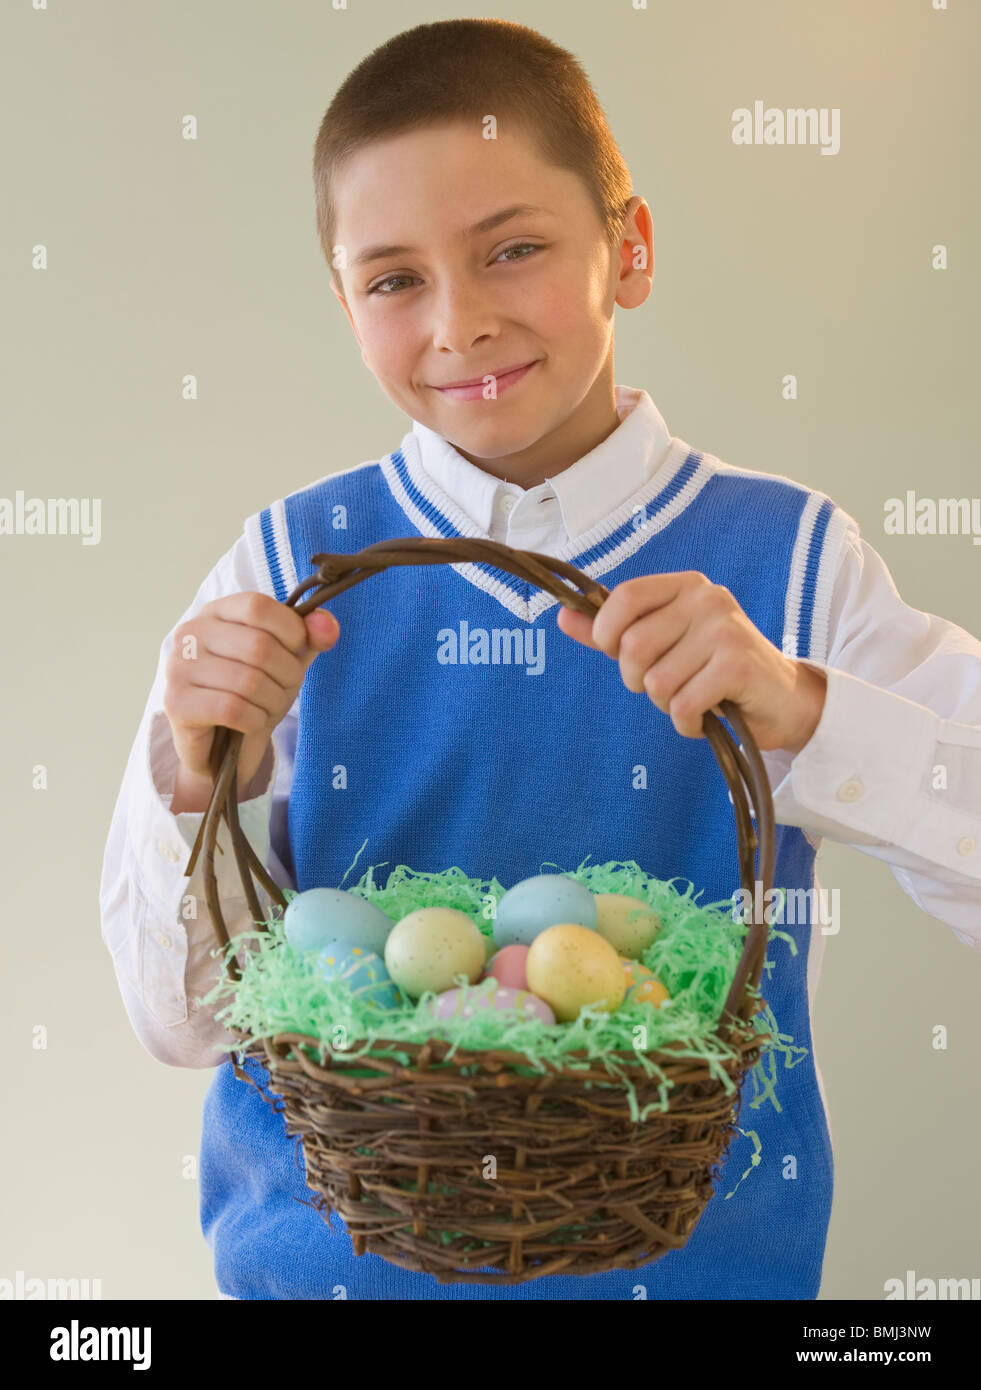 Young boy holding a basket of Easter eggs Stock Photo